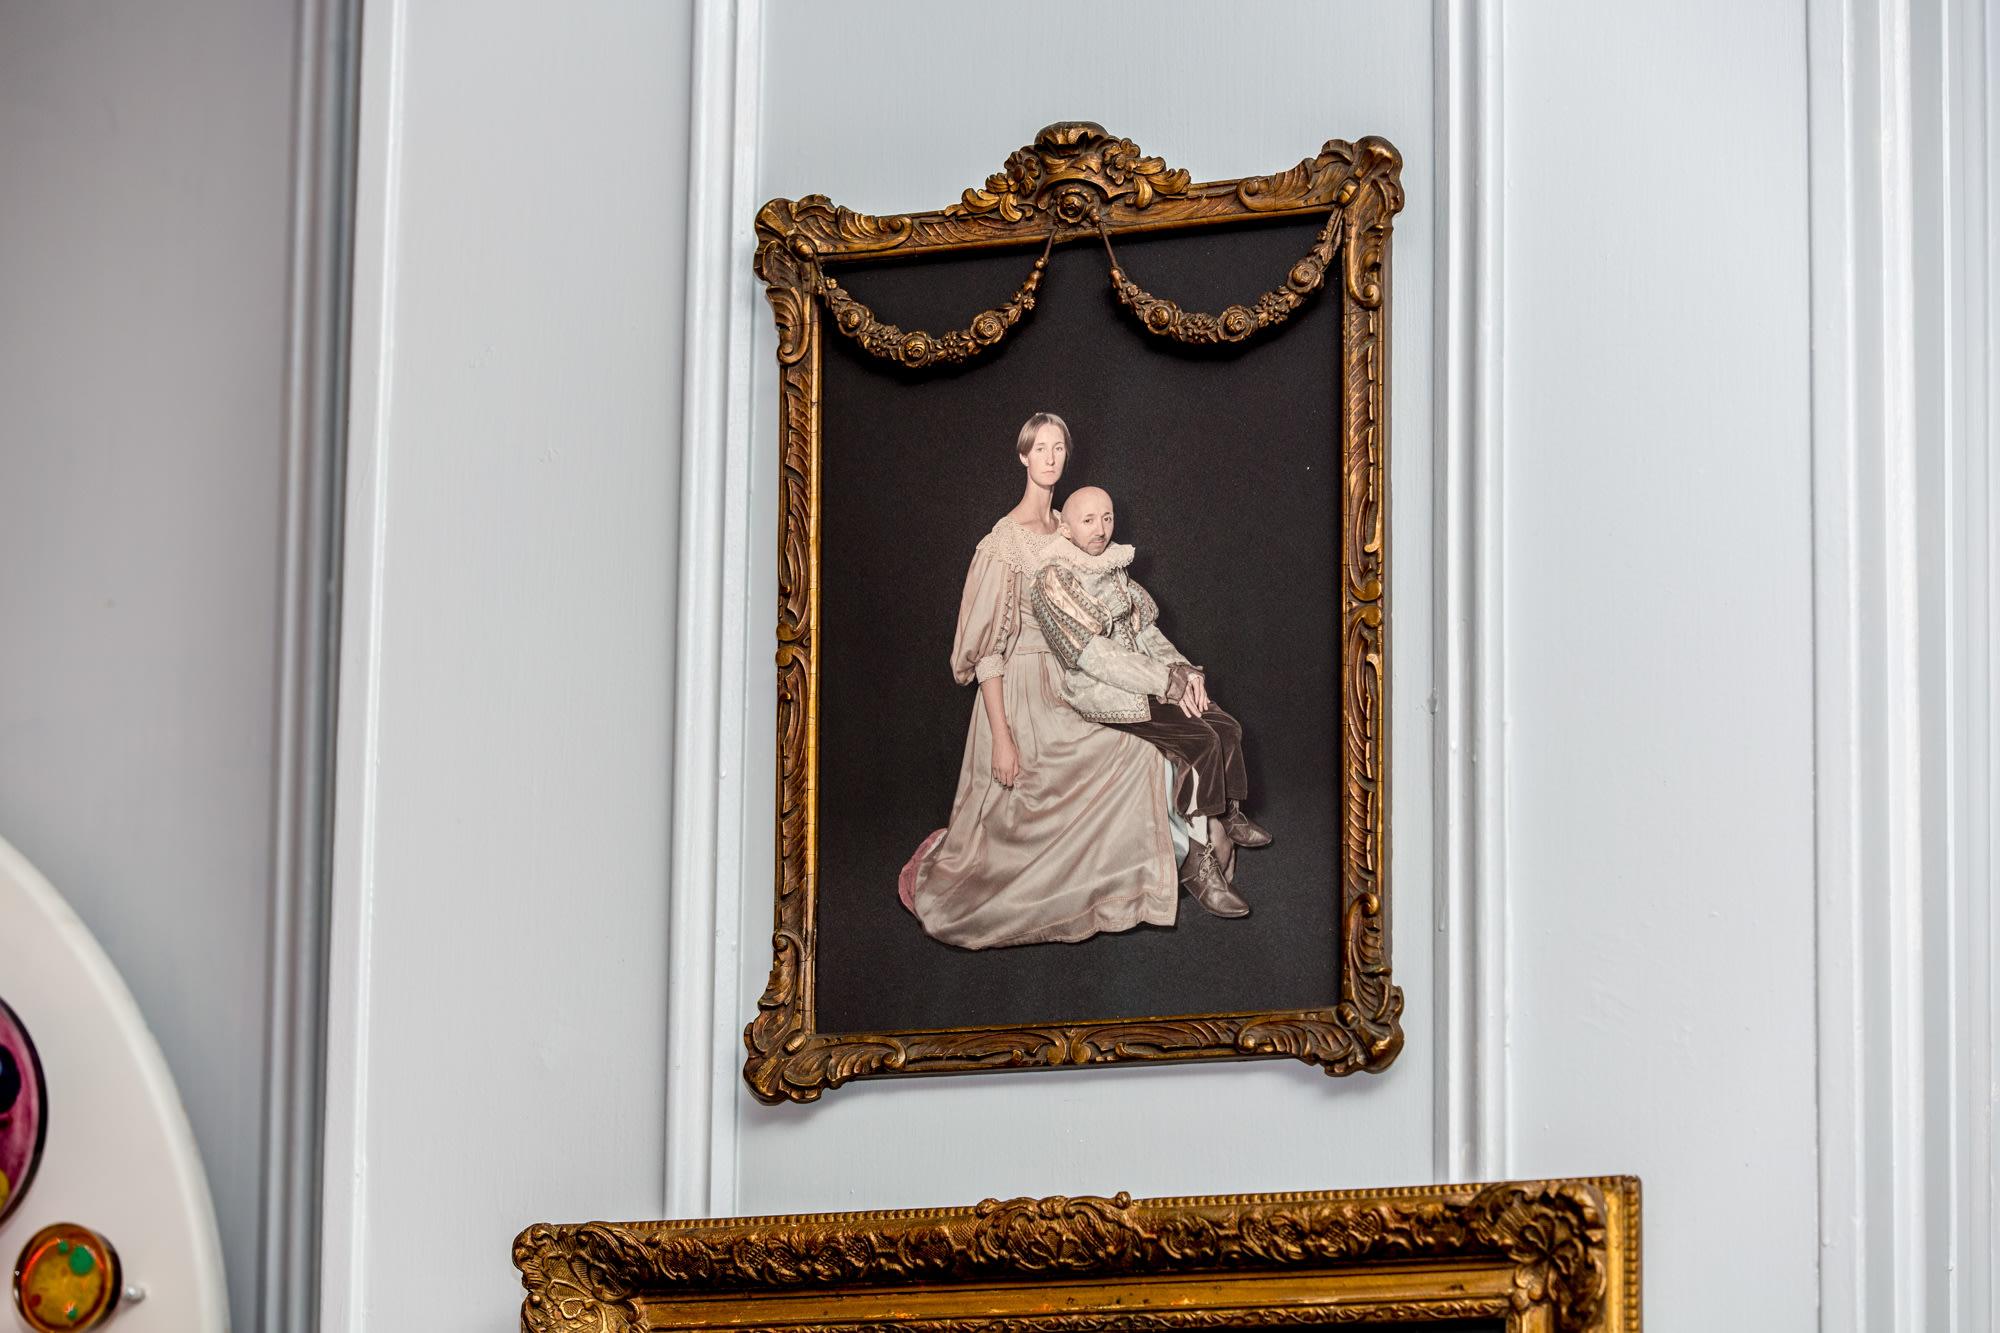 Tami Bahat Portrait Photograph - Old Master Influenced Photography - The Arrangement, Framed Archival Pigment 